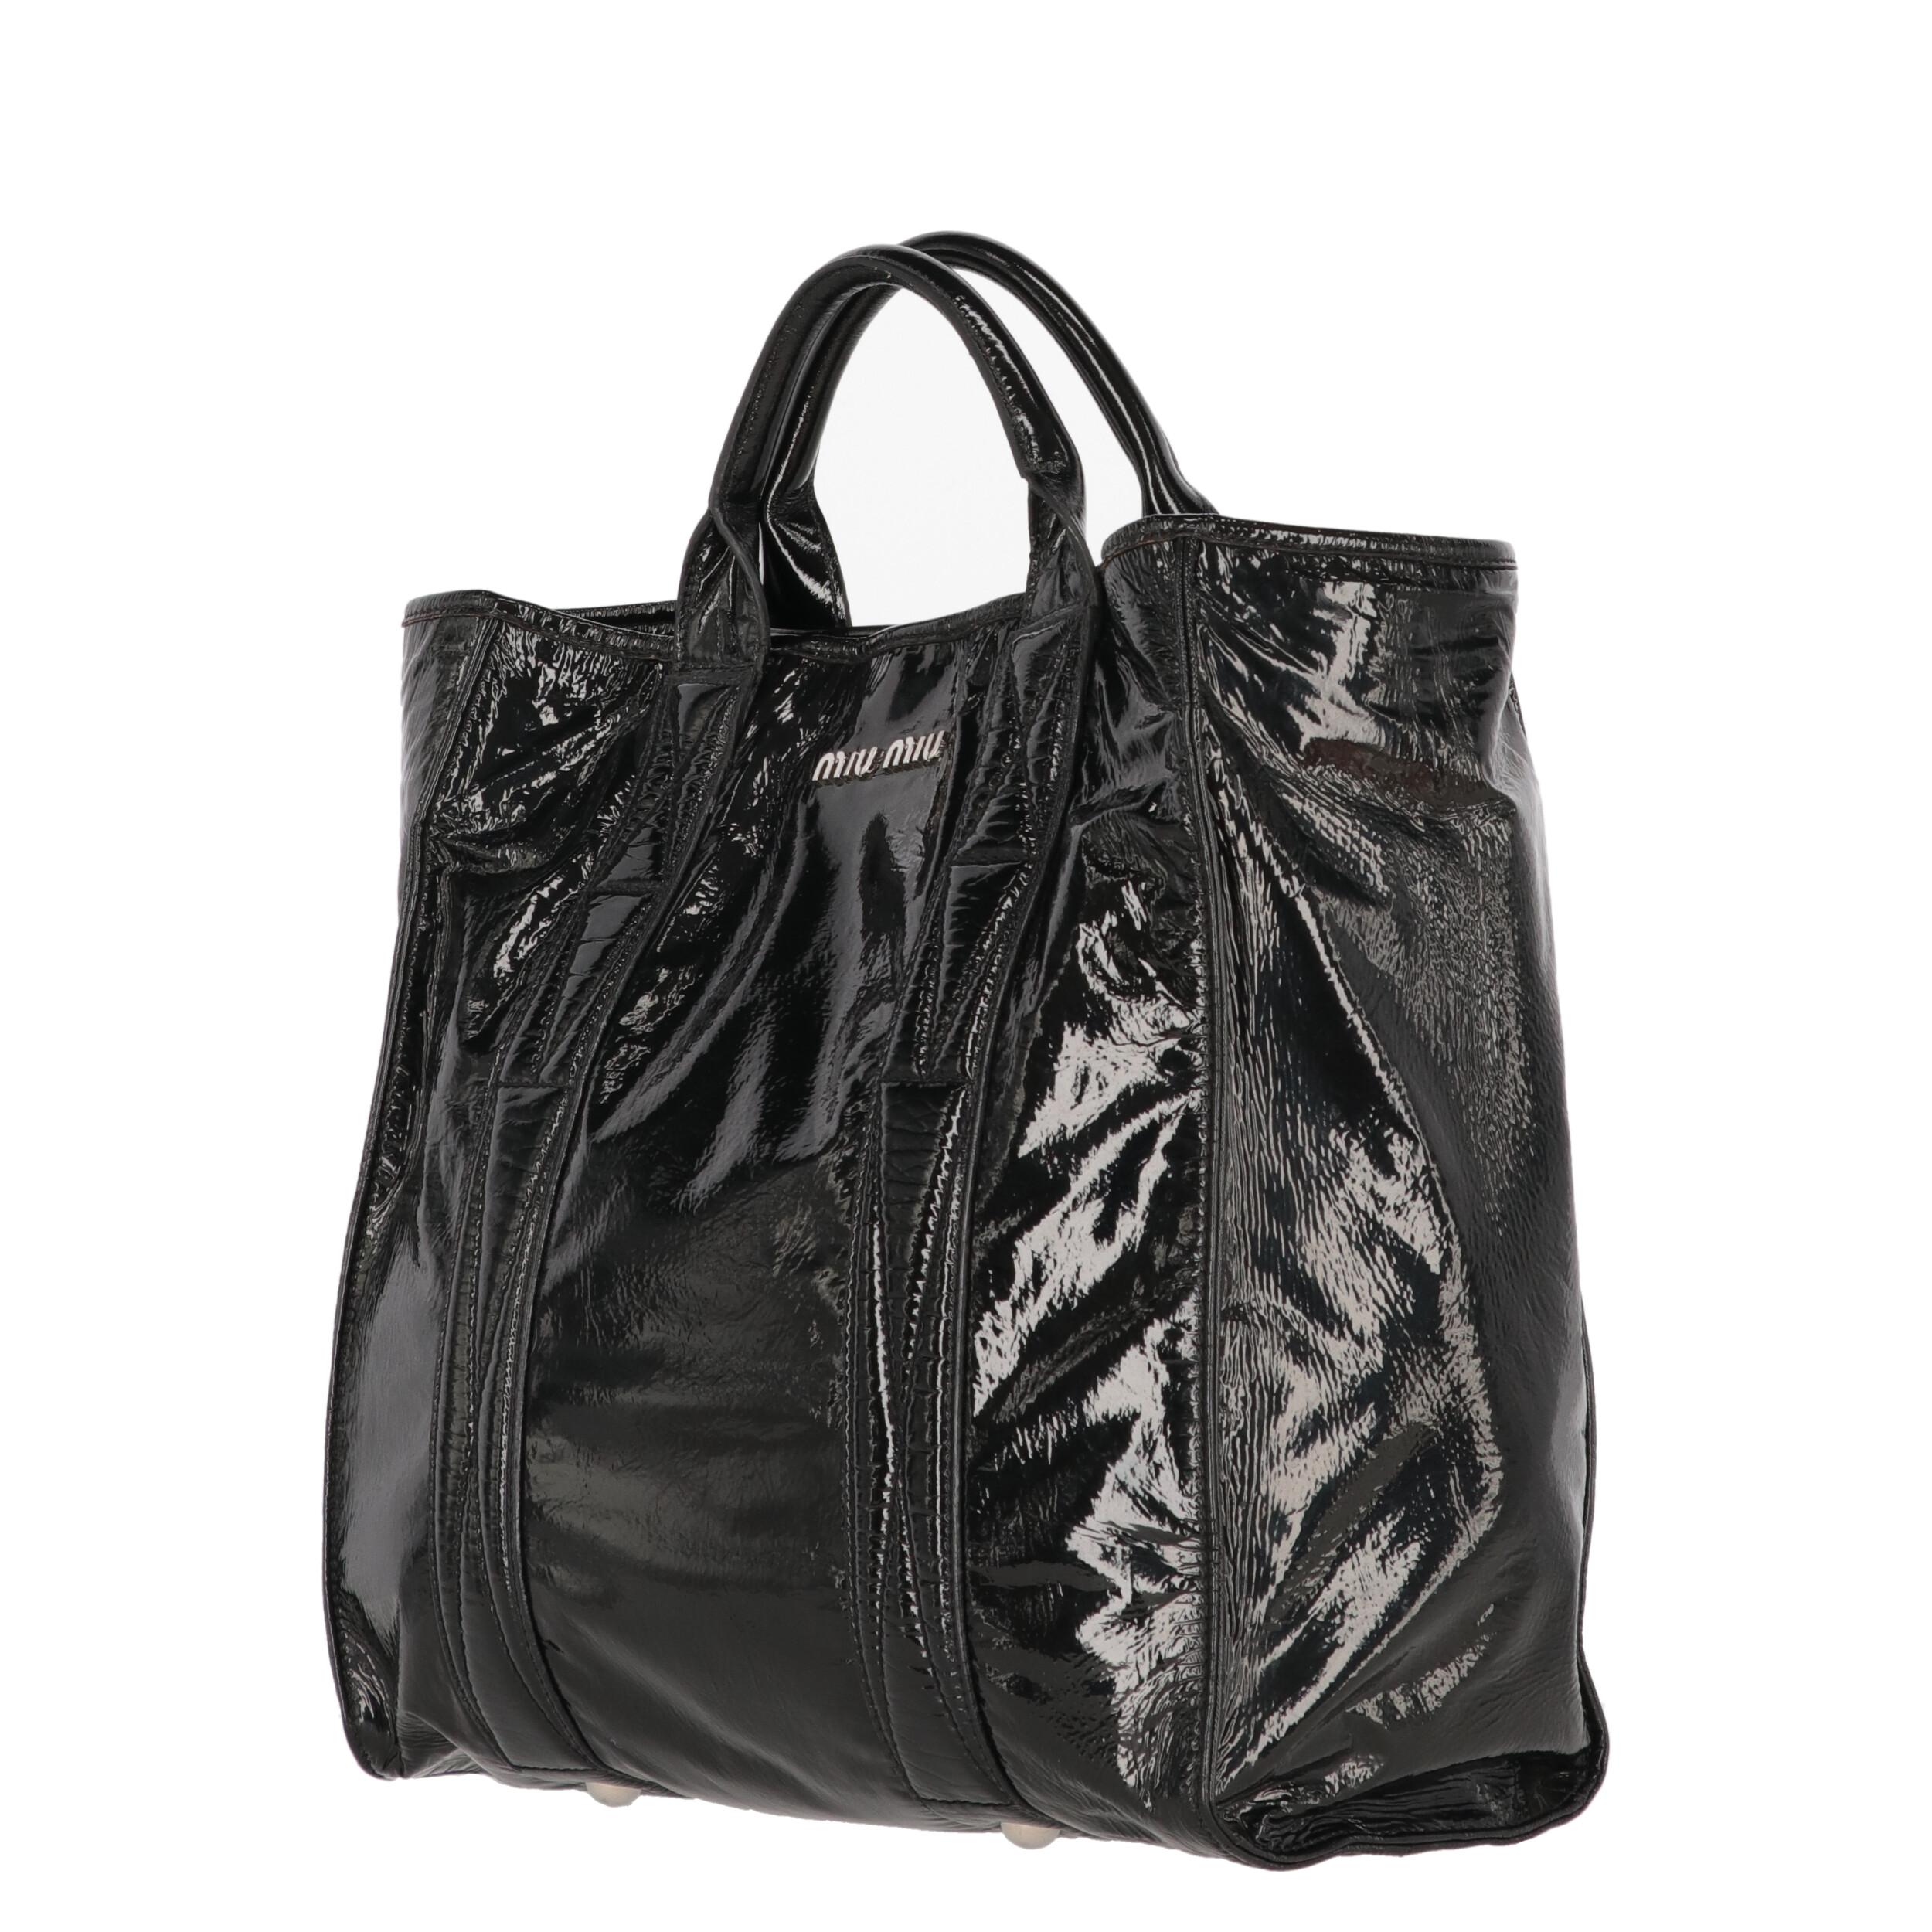 Miu Miu black patent leather tote bag. Model with double handles, silver metal details and magnetic button closure.
Years: 2000s

Made in Italy

Flat measurements

Height: 35 cm
Width: 33,5 cm
Depth: 14 cm
Handles height: 30 cm